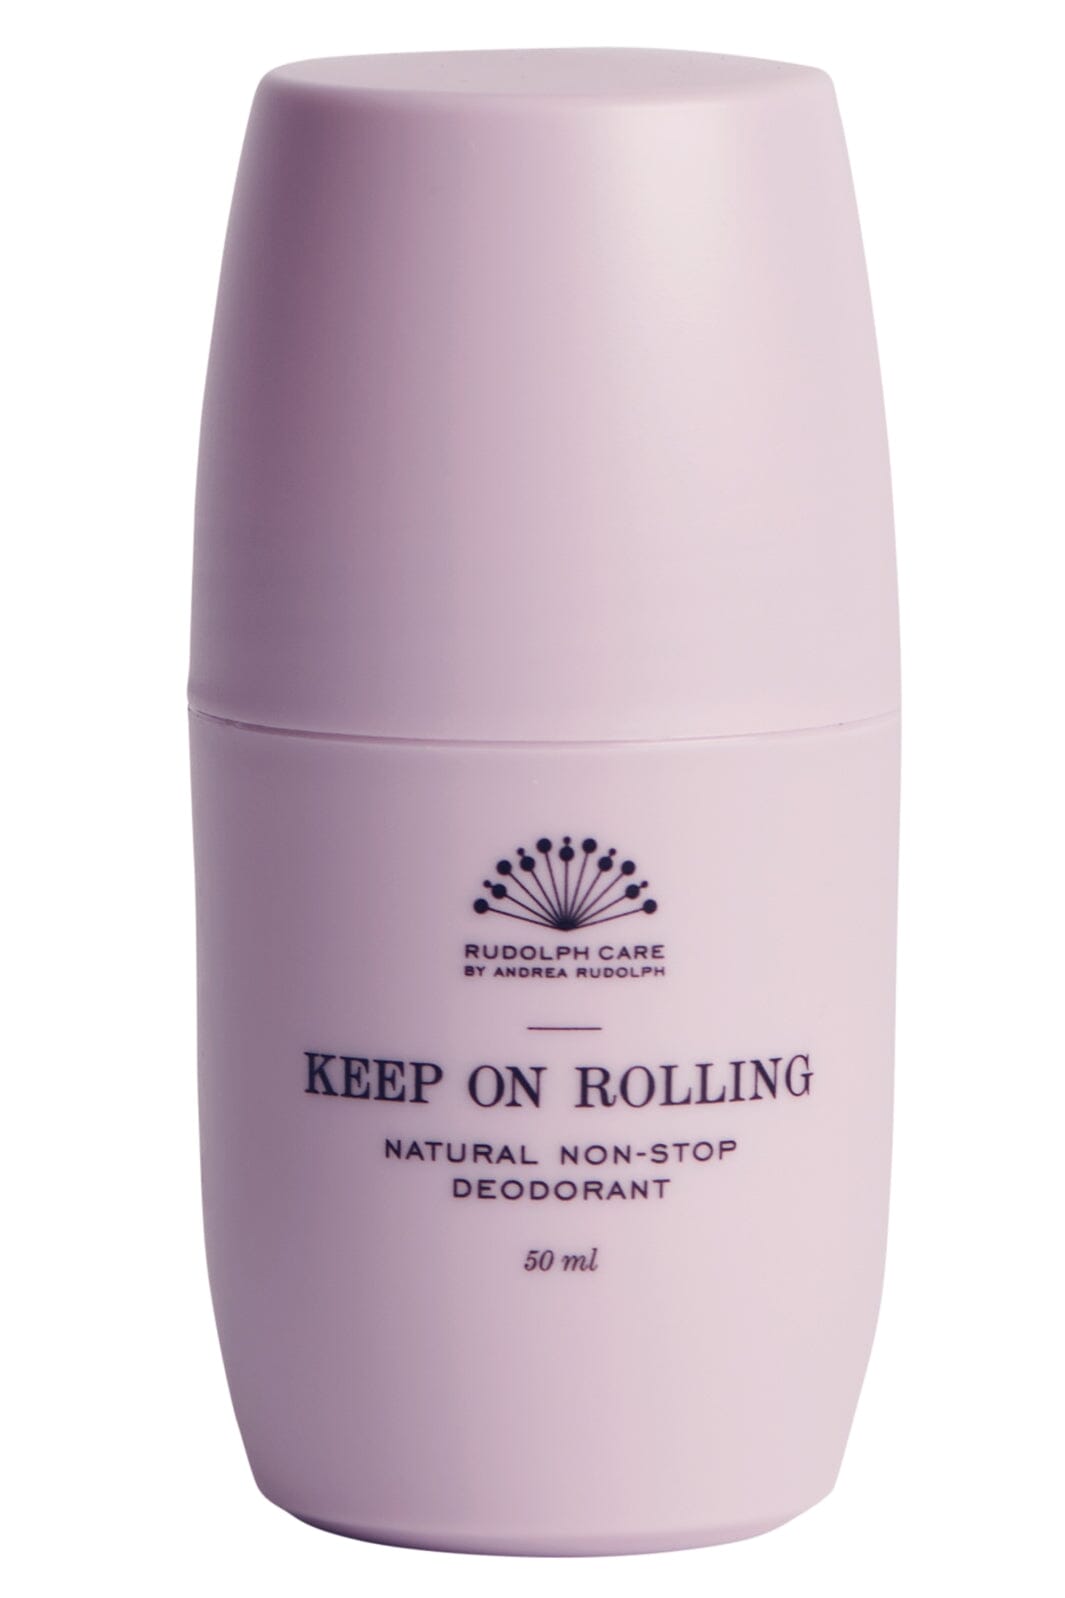 Rudolph Care - Keep On Rolling Deo Deodorant 